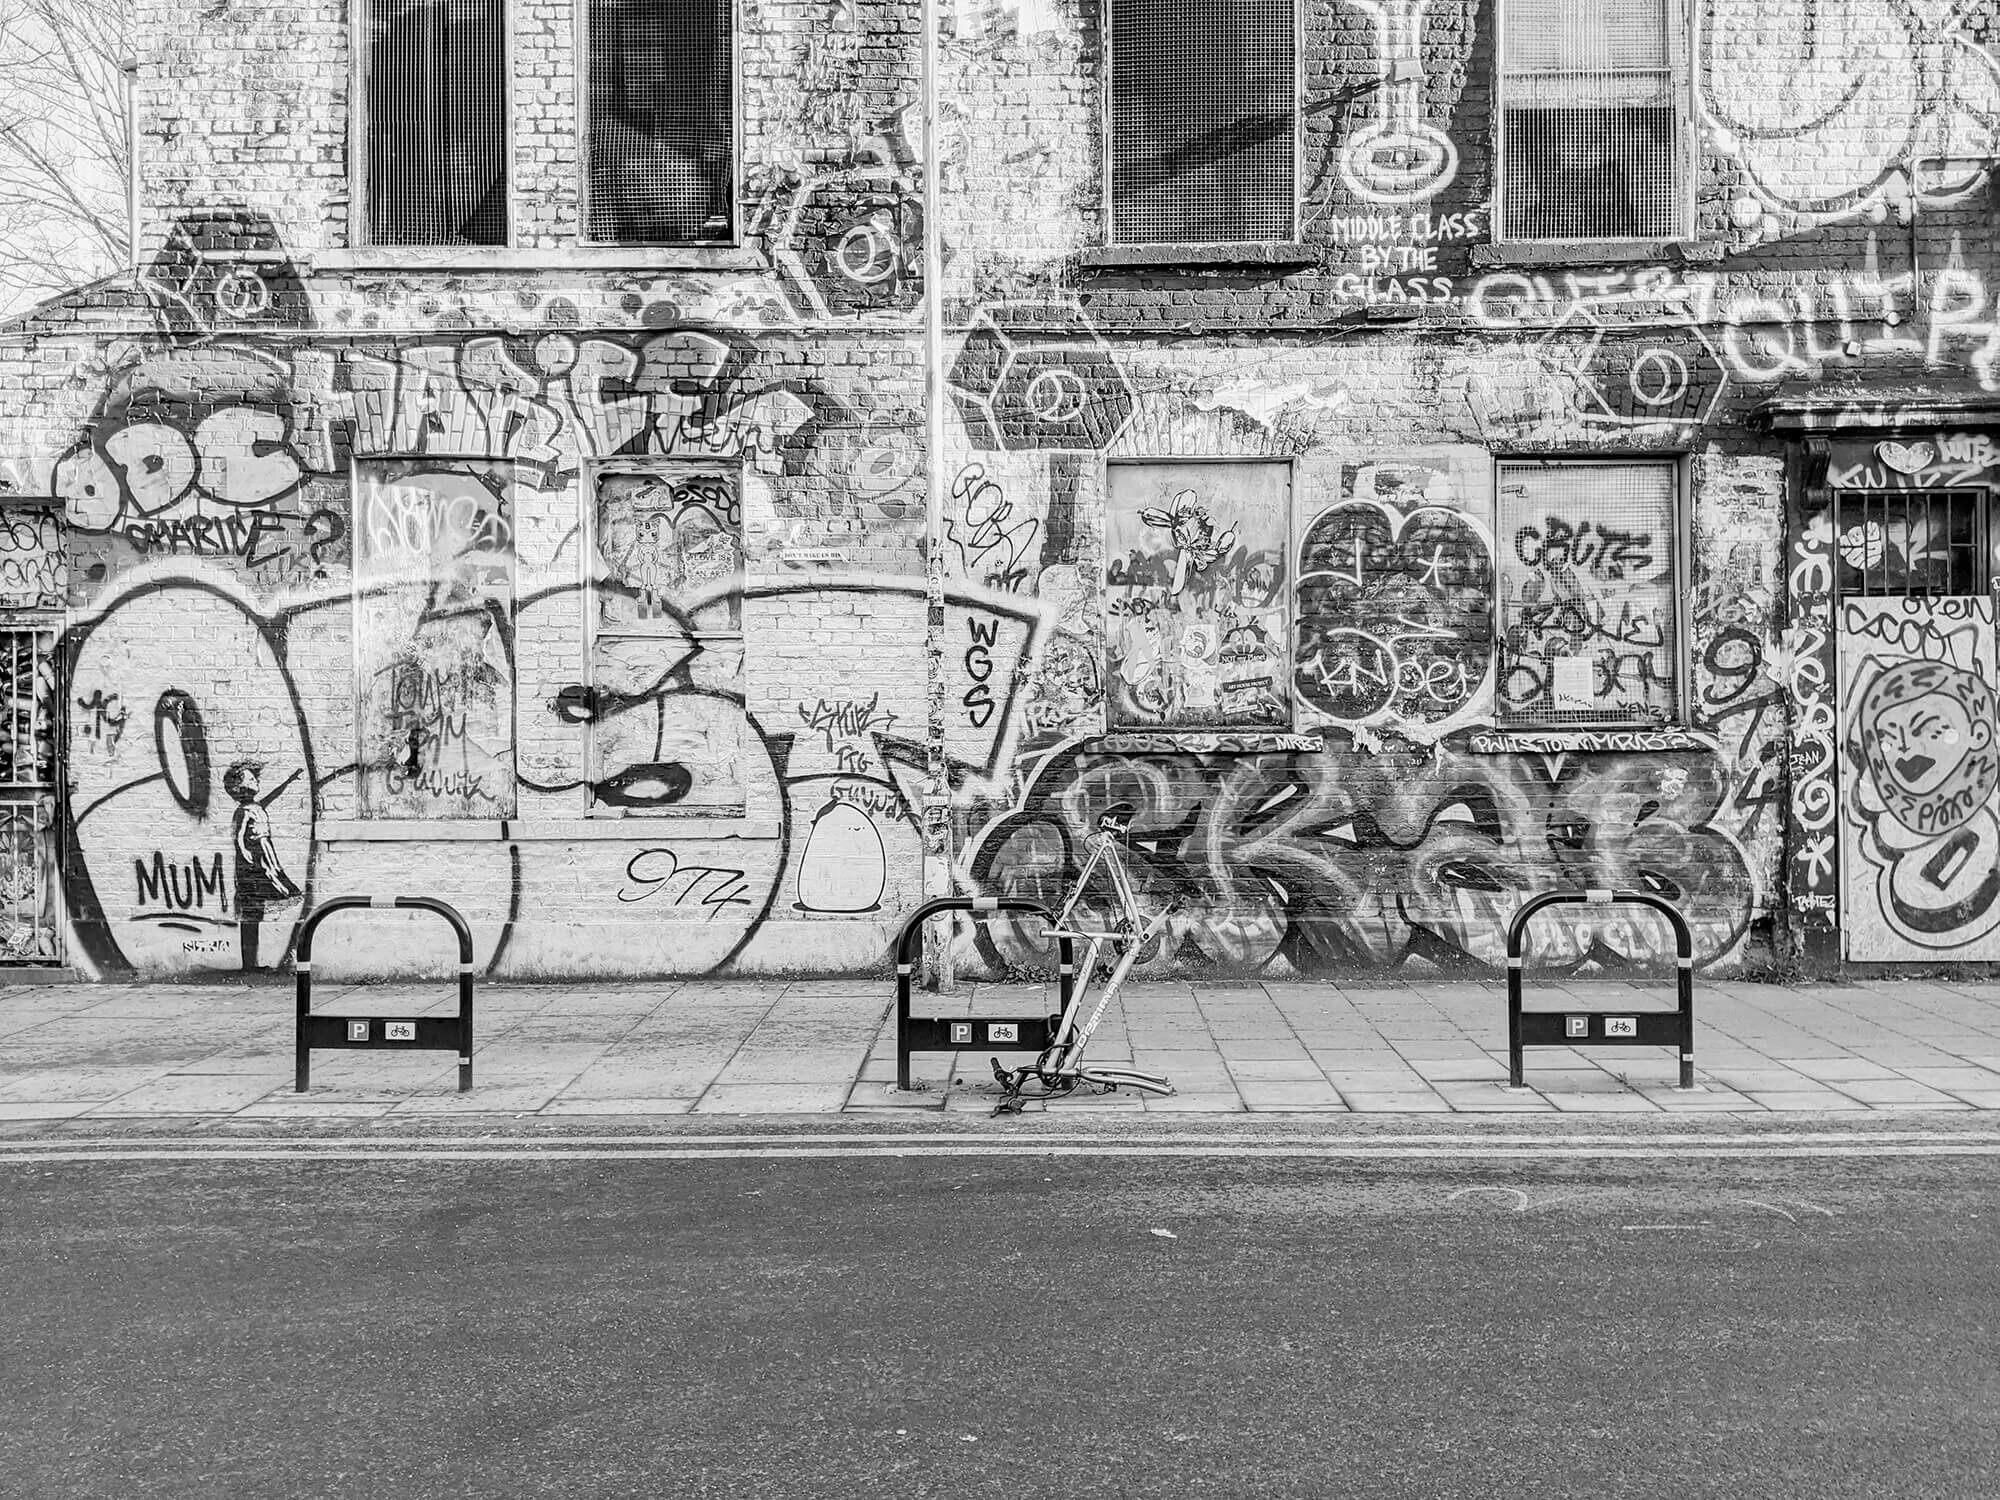 Abandoned building covered in graffiti, with bike chained to stand.